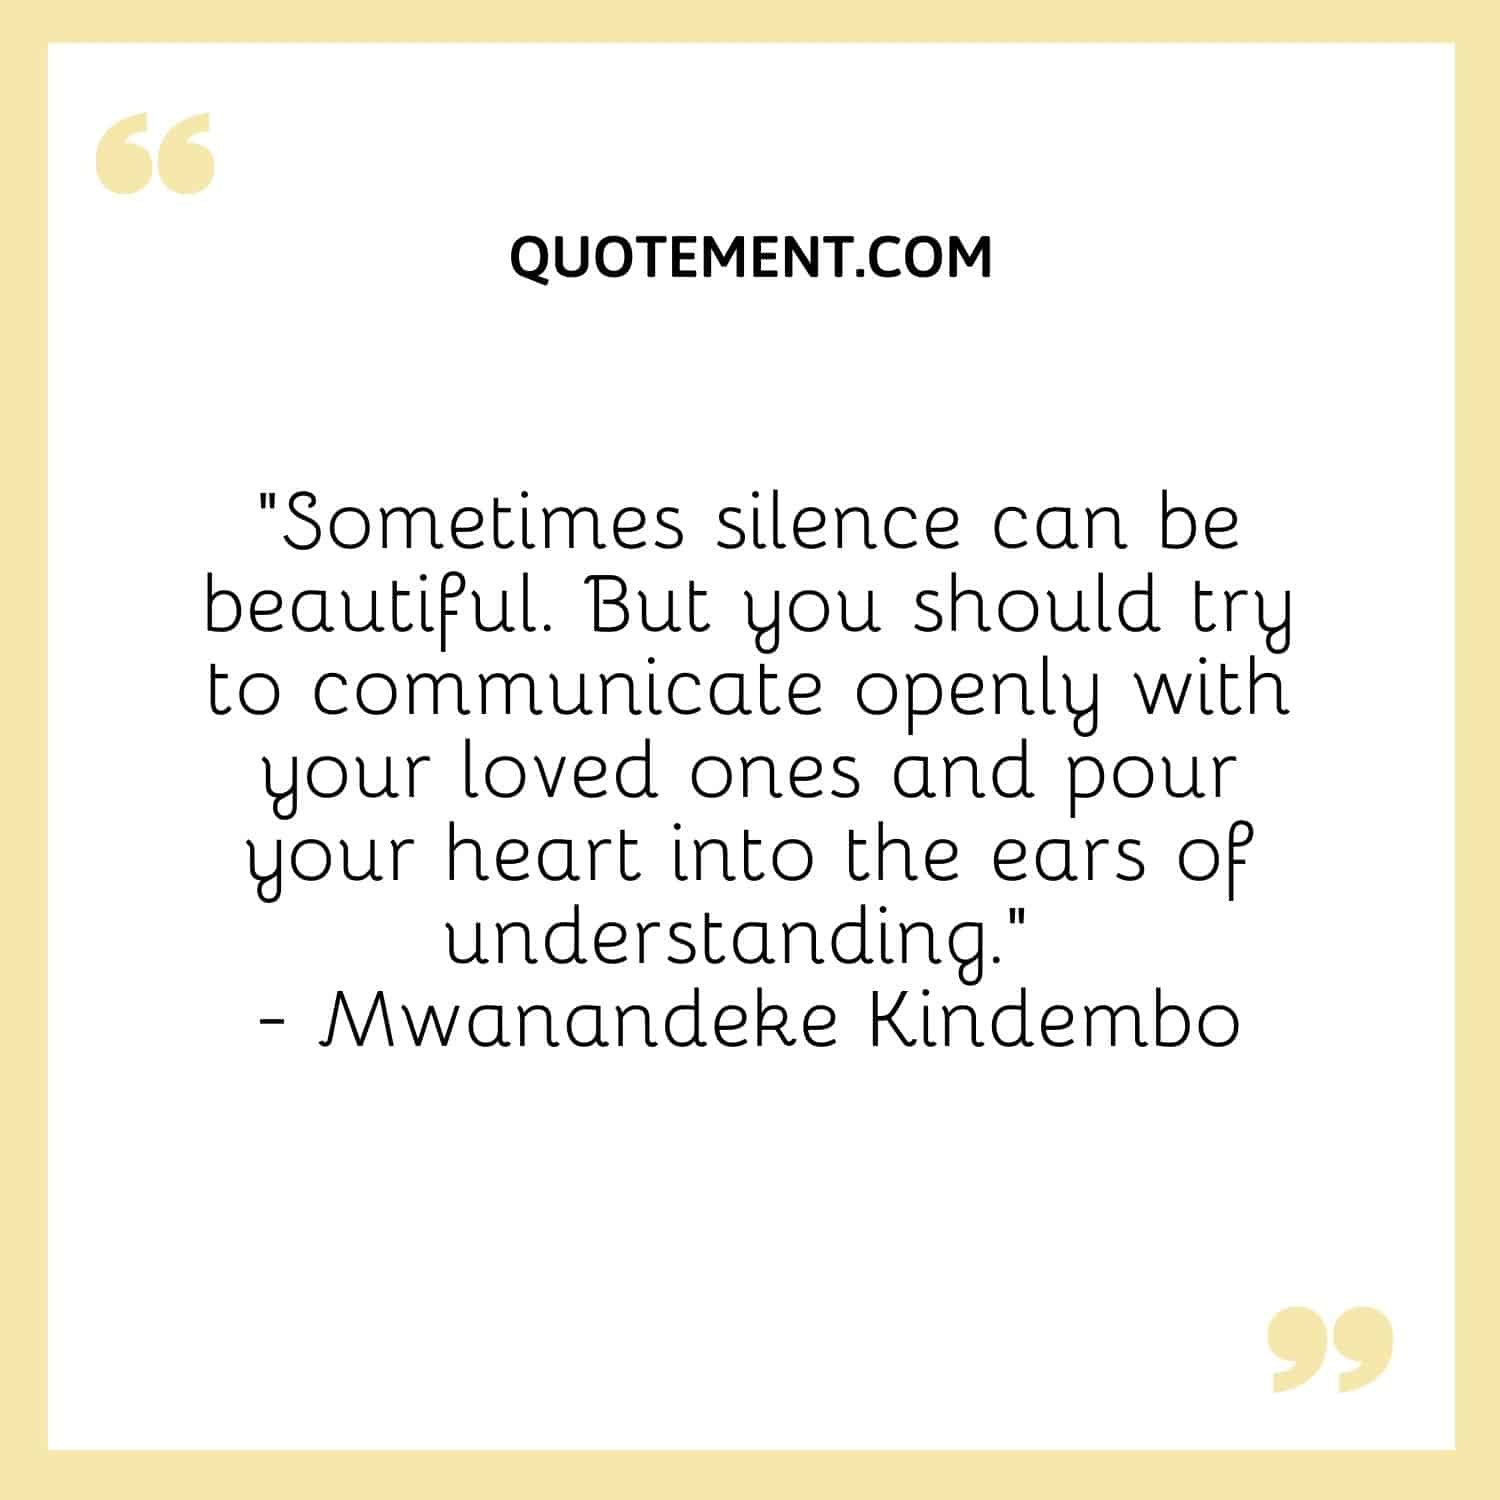 “Sometimes silence can be beautiful. But you should try to communicate openly with your loved ones and pour your heart into the ears of understanding.” ― Mwanandeke Kindembo